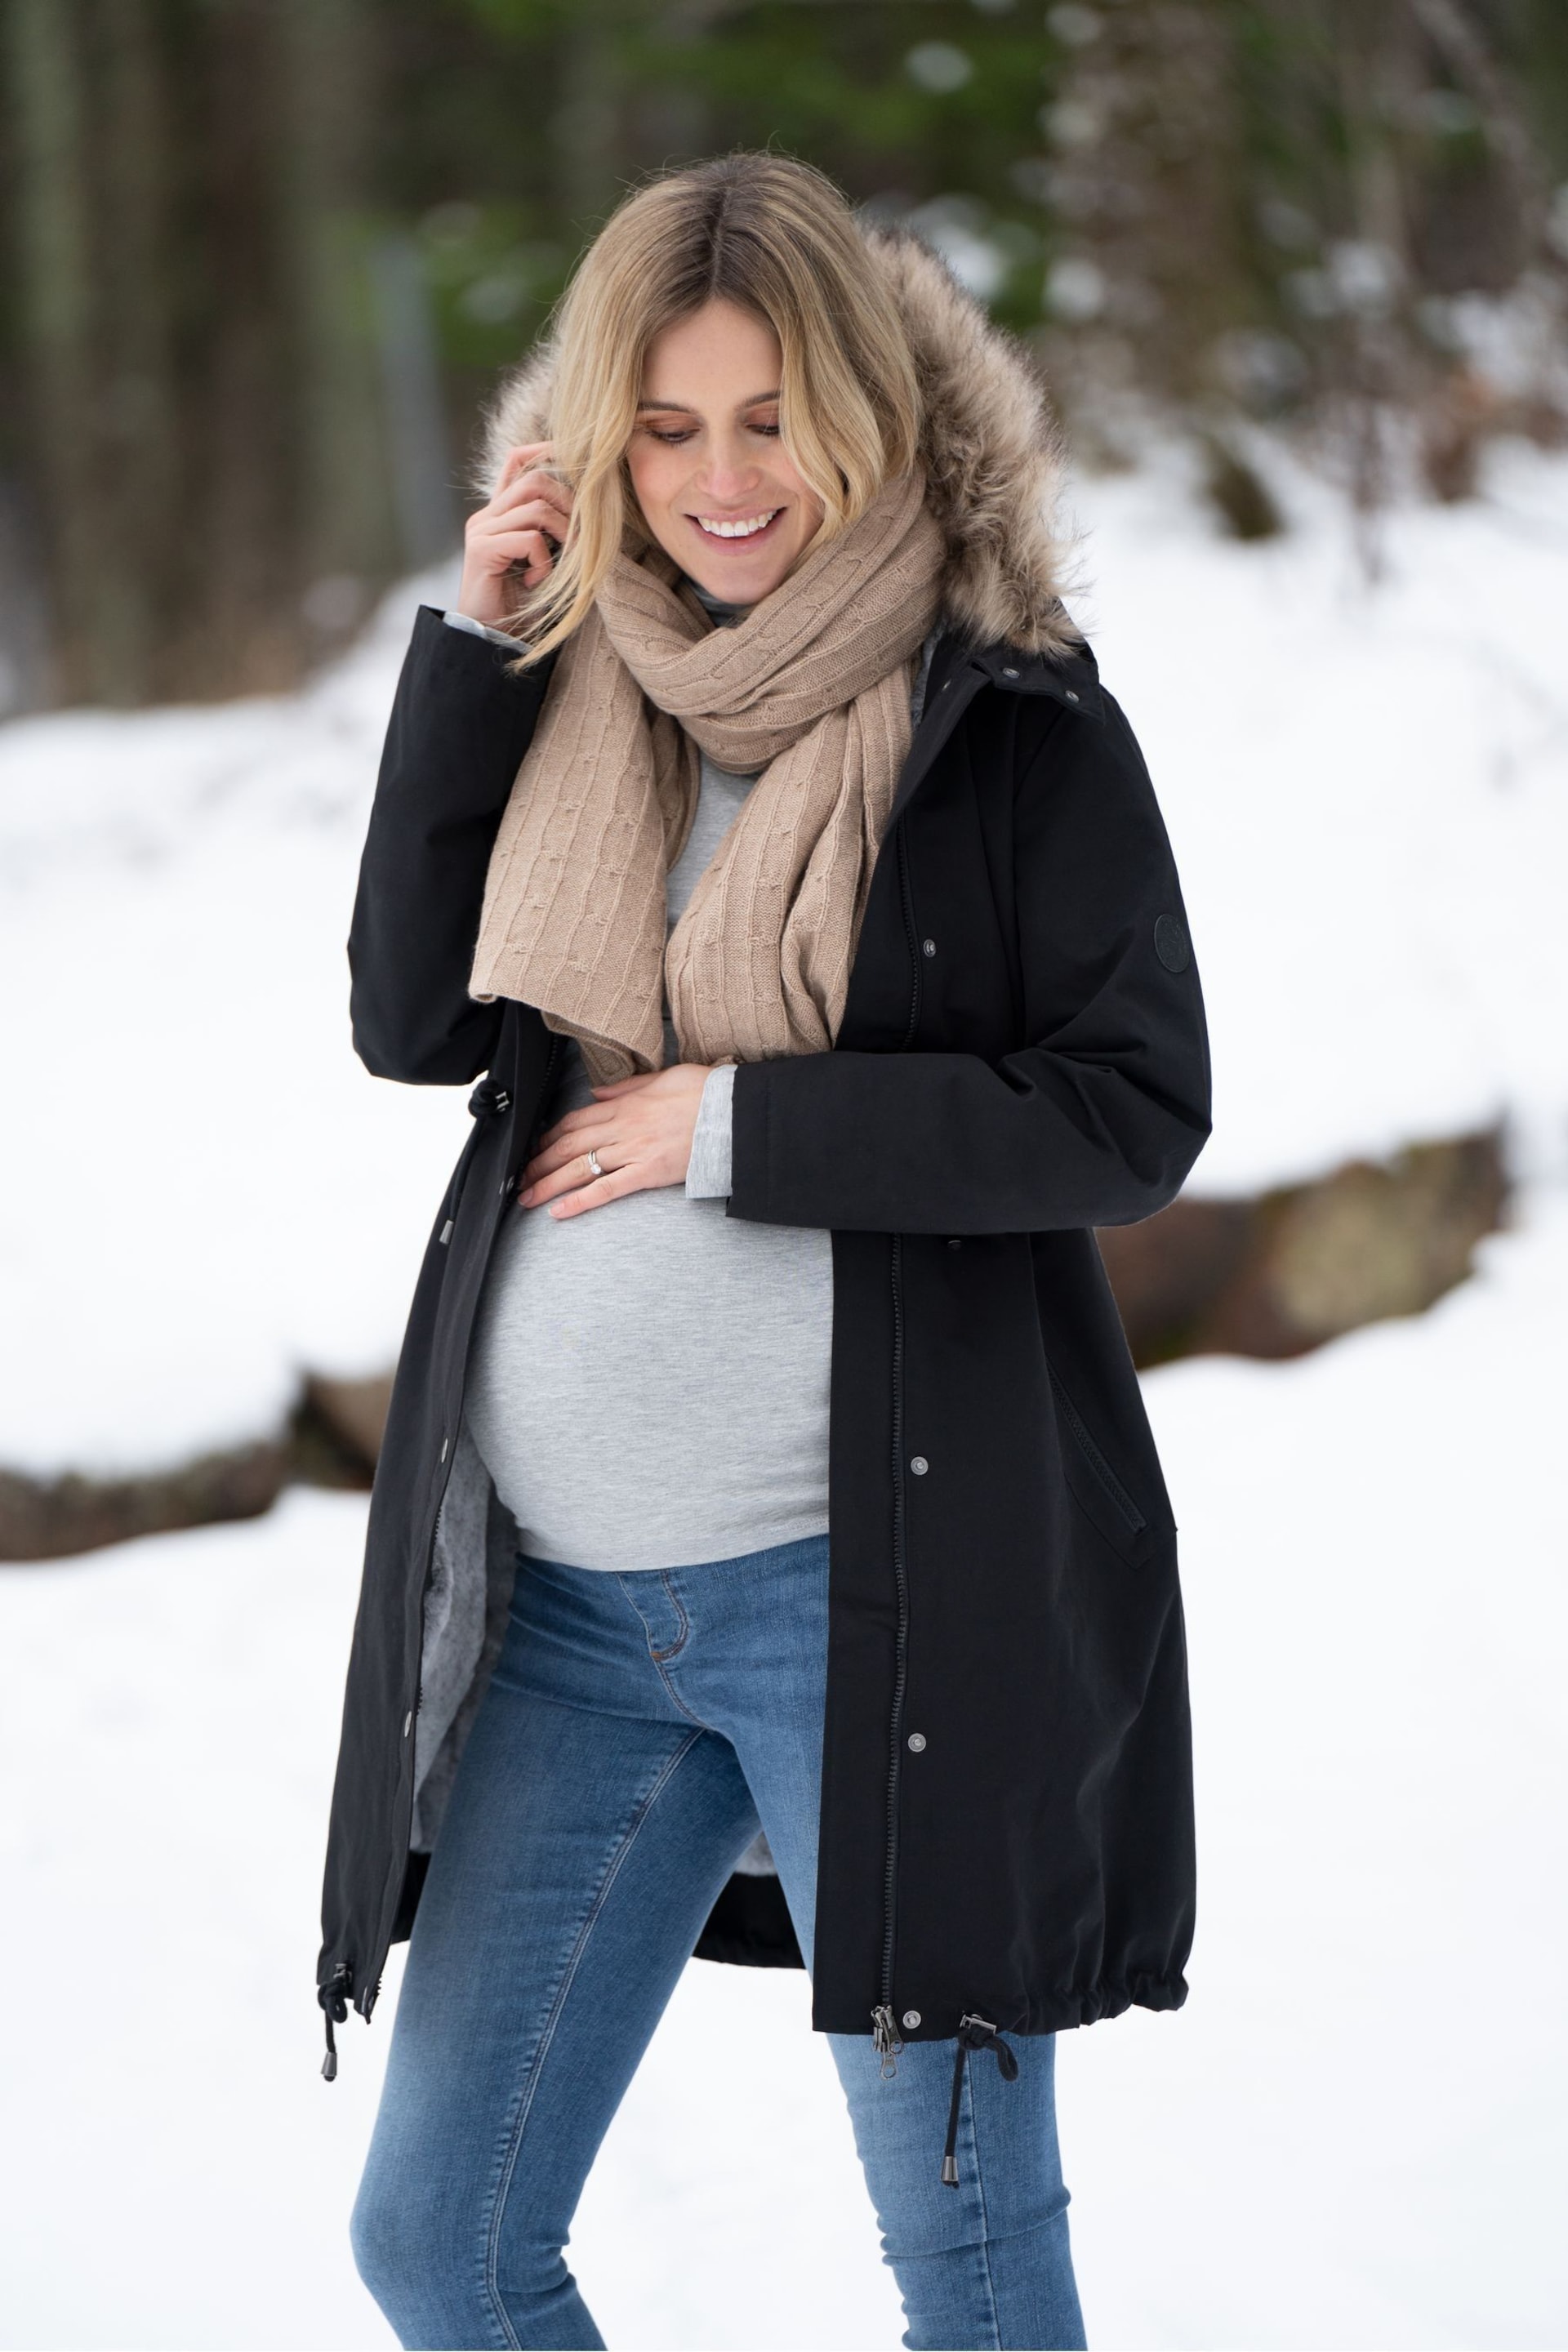 Seraphine Black 3 in 1 Winter Maternity Parka - Image 5 of 6